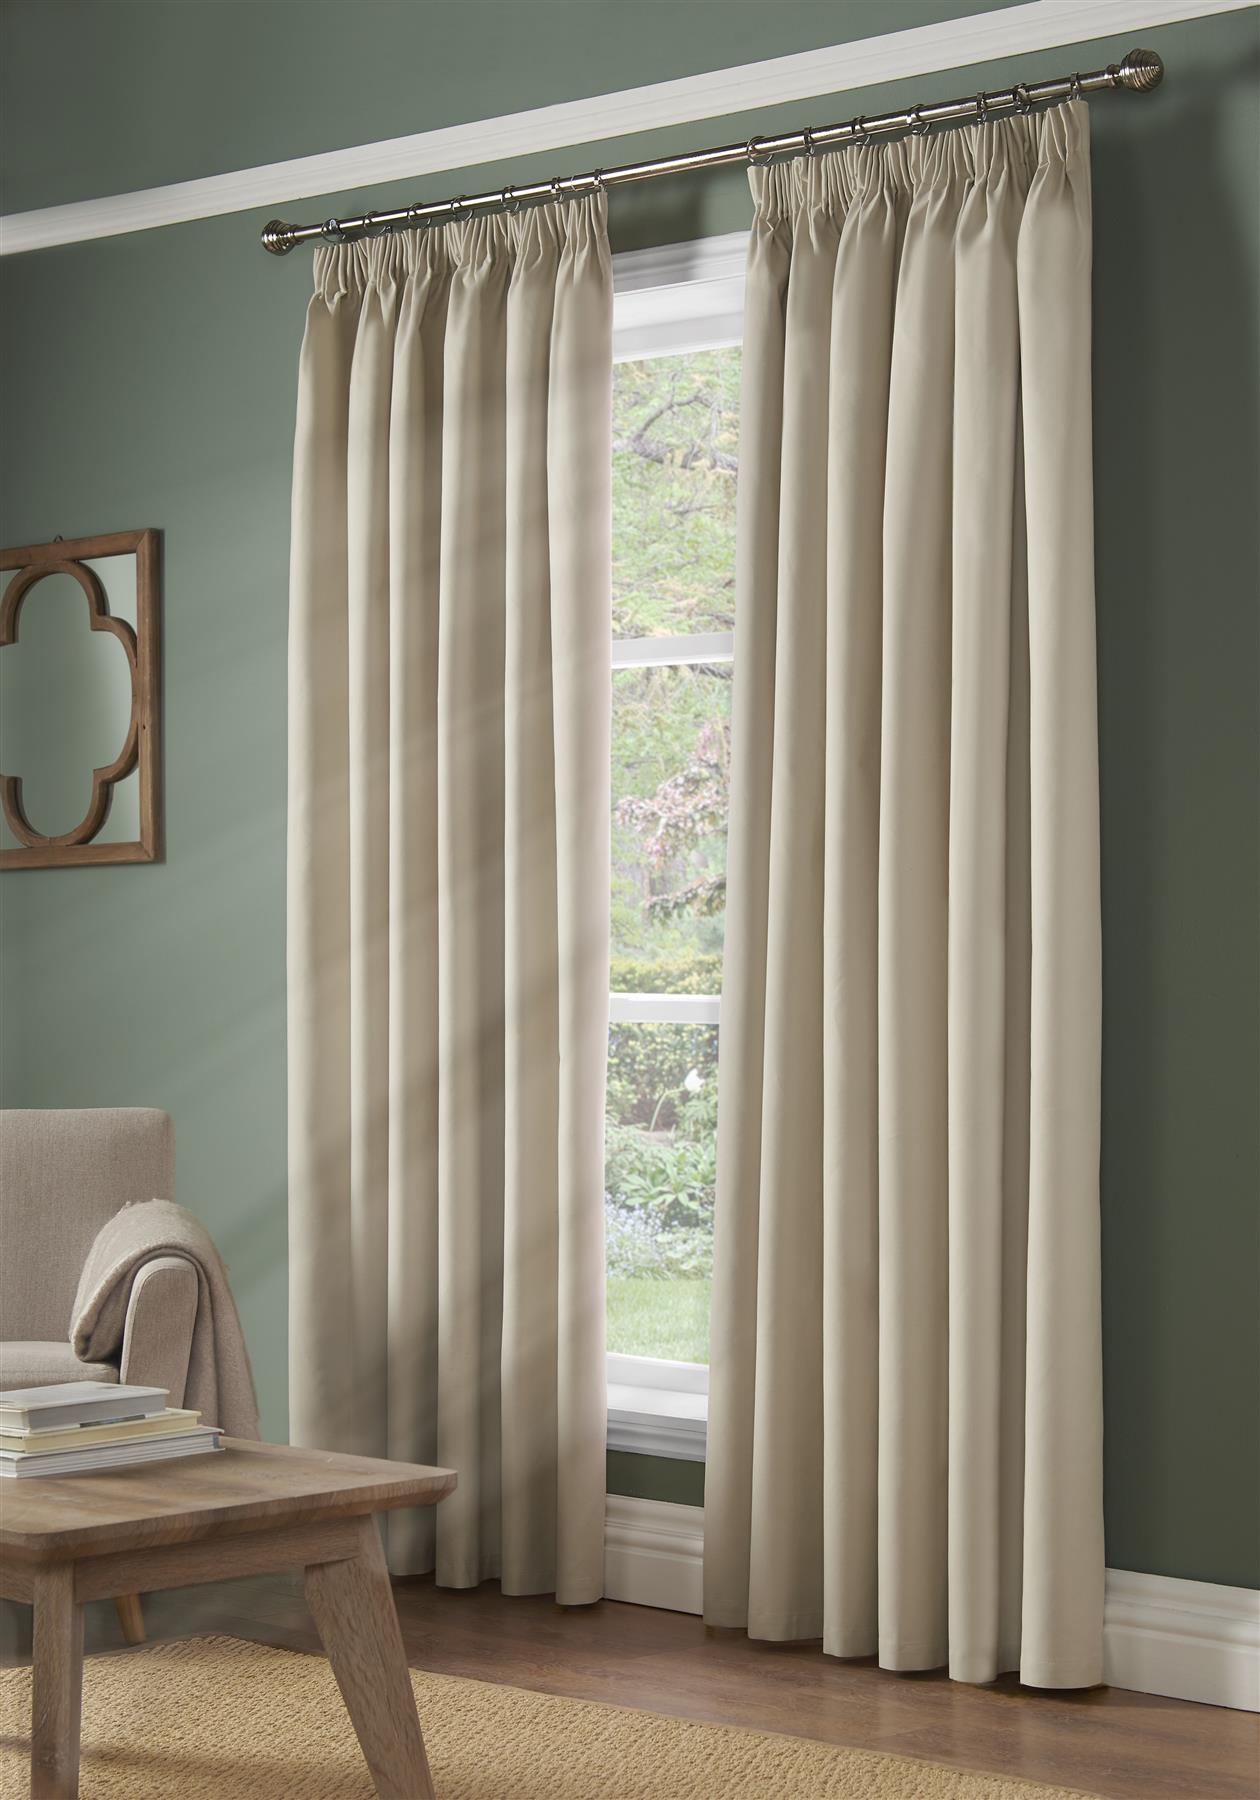 Cream Blackout Thermal Taped Curtains - Pair